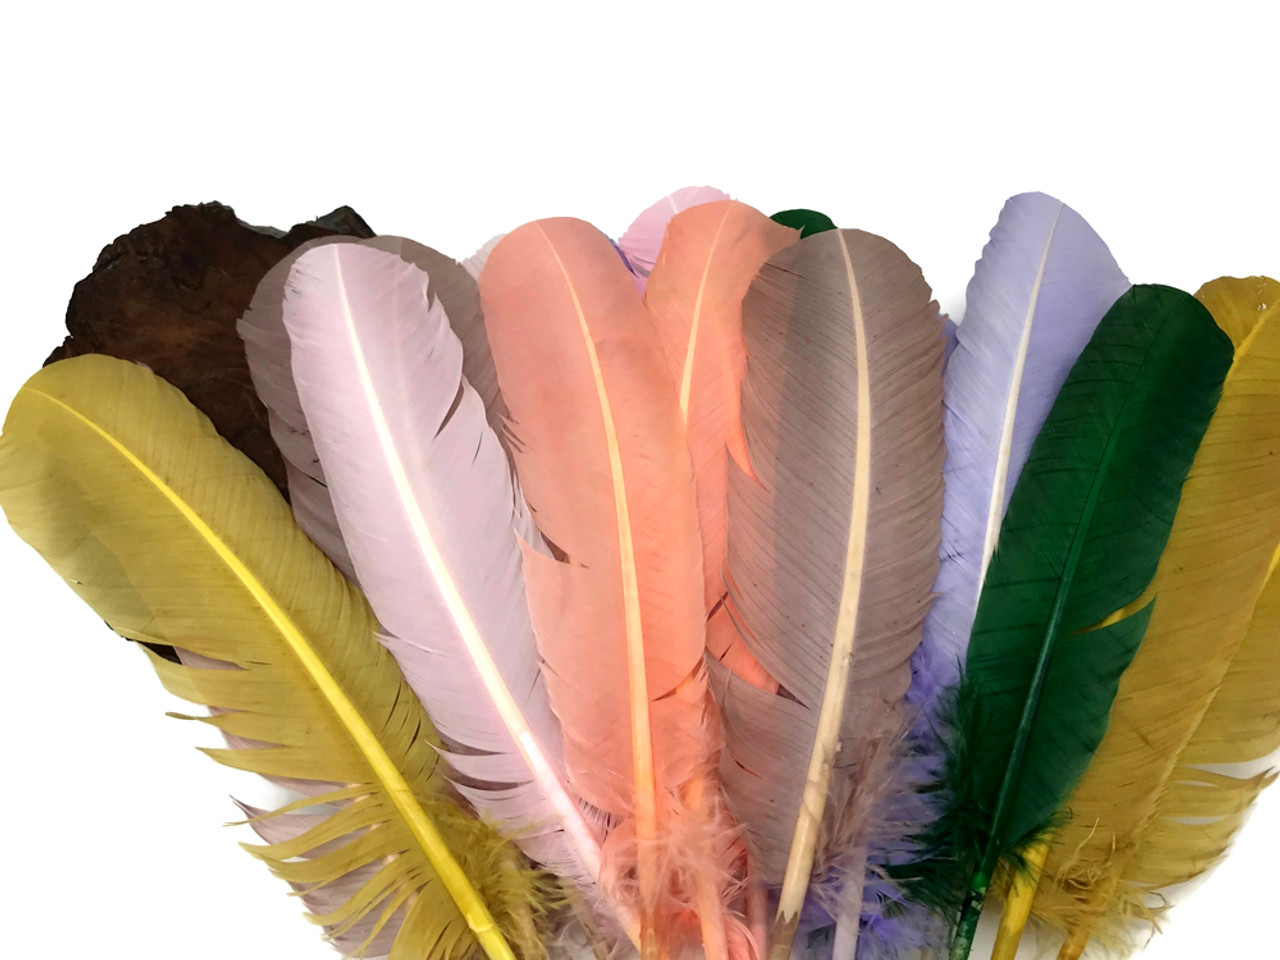 6 Pieces - Purple Turkey Rounds Secondary Wing Quill Feathers